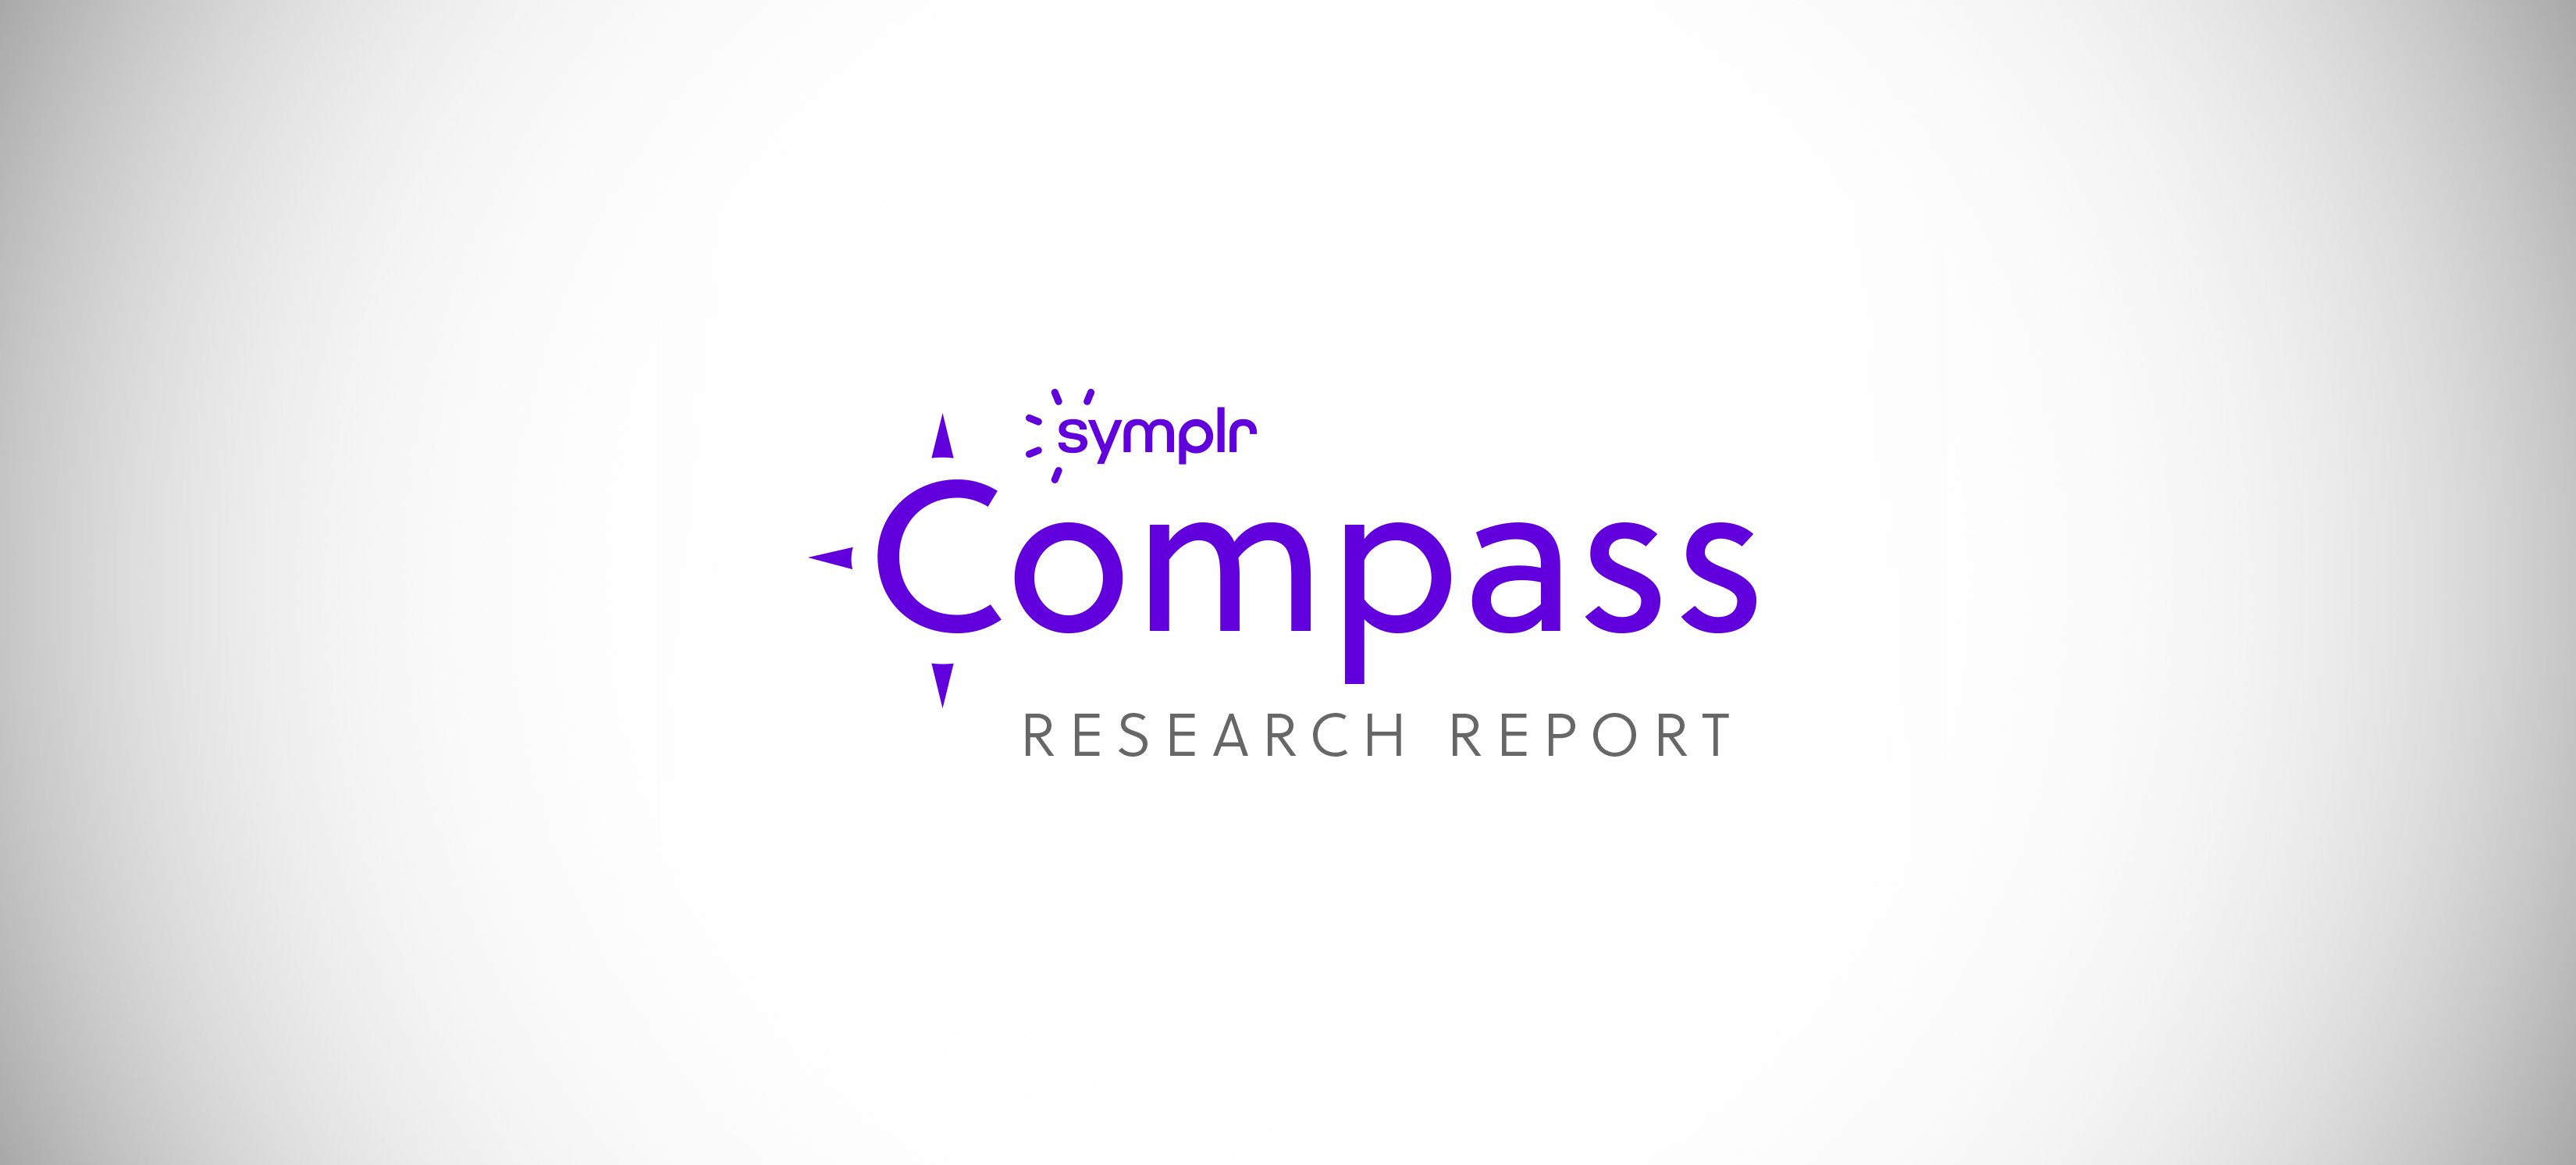 symplr Compass Research Report